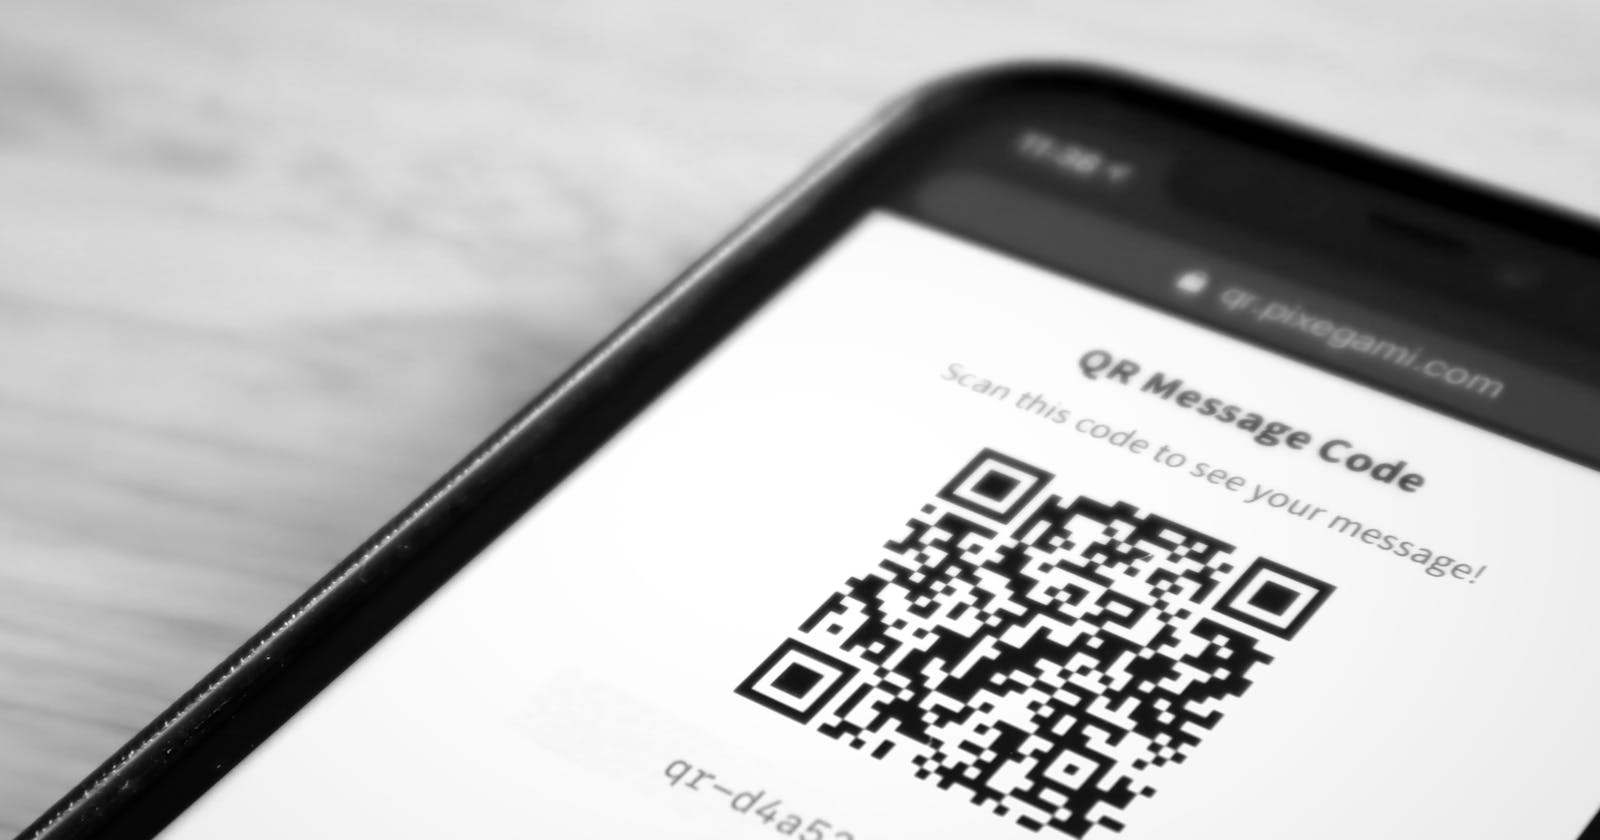 Building a QR code micro-app with Python and AWS